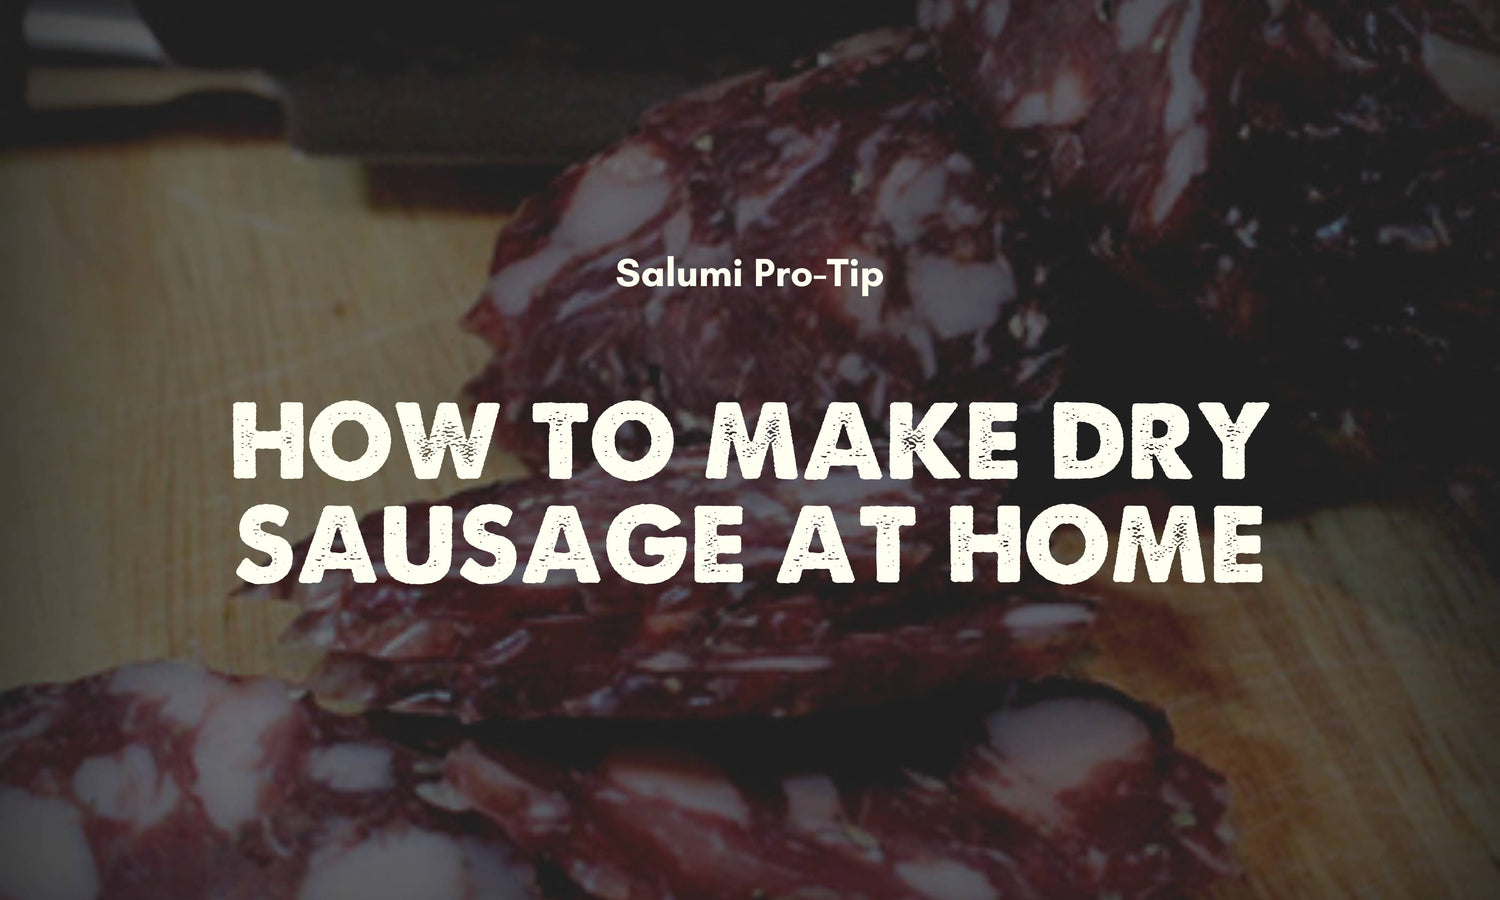 How to Make Dry Sausage at Home